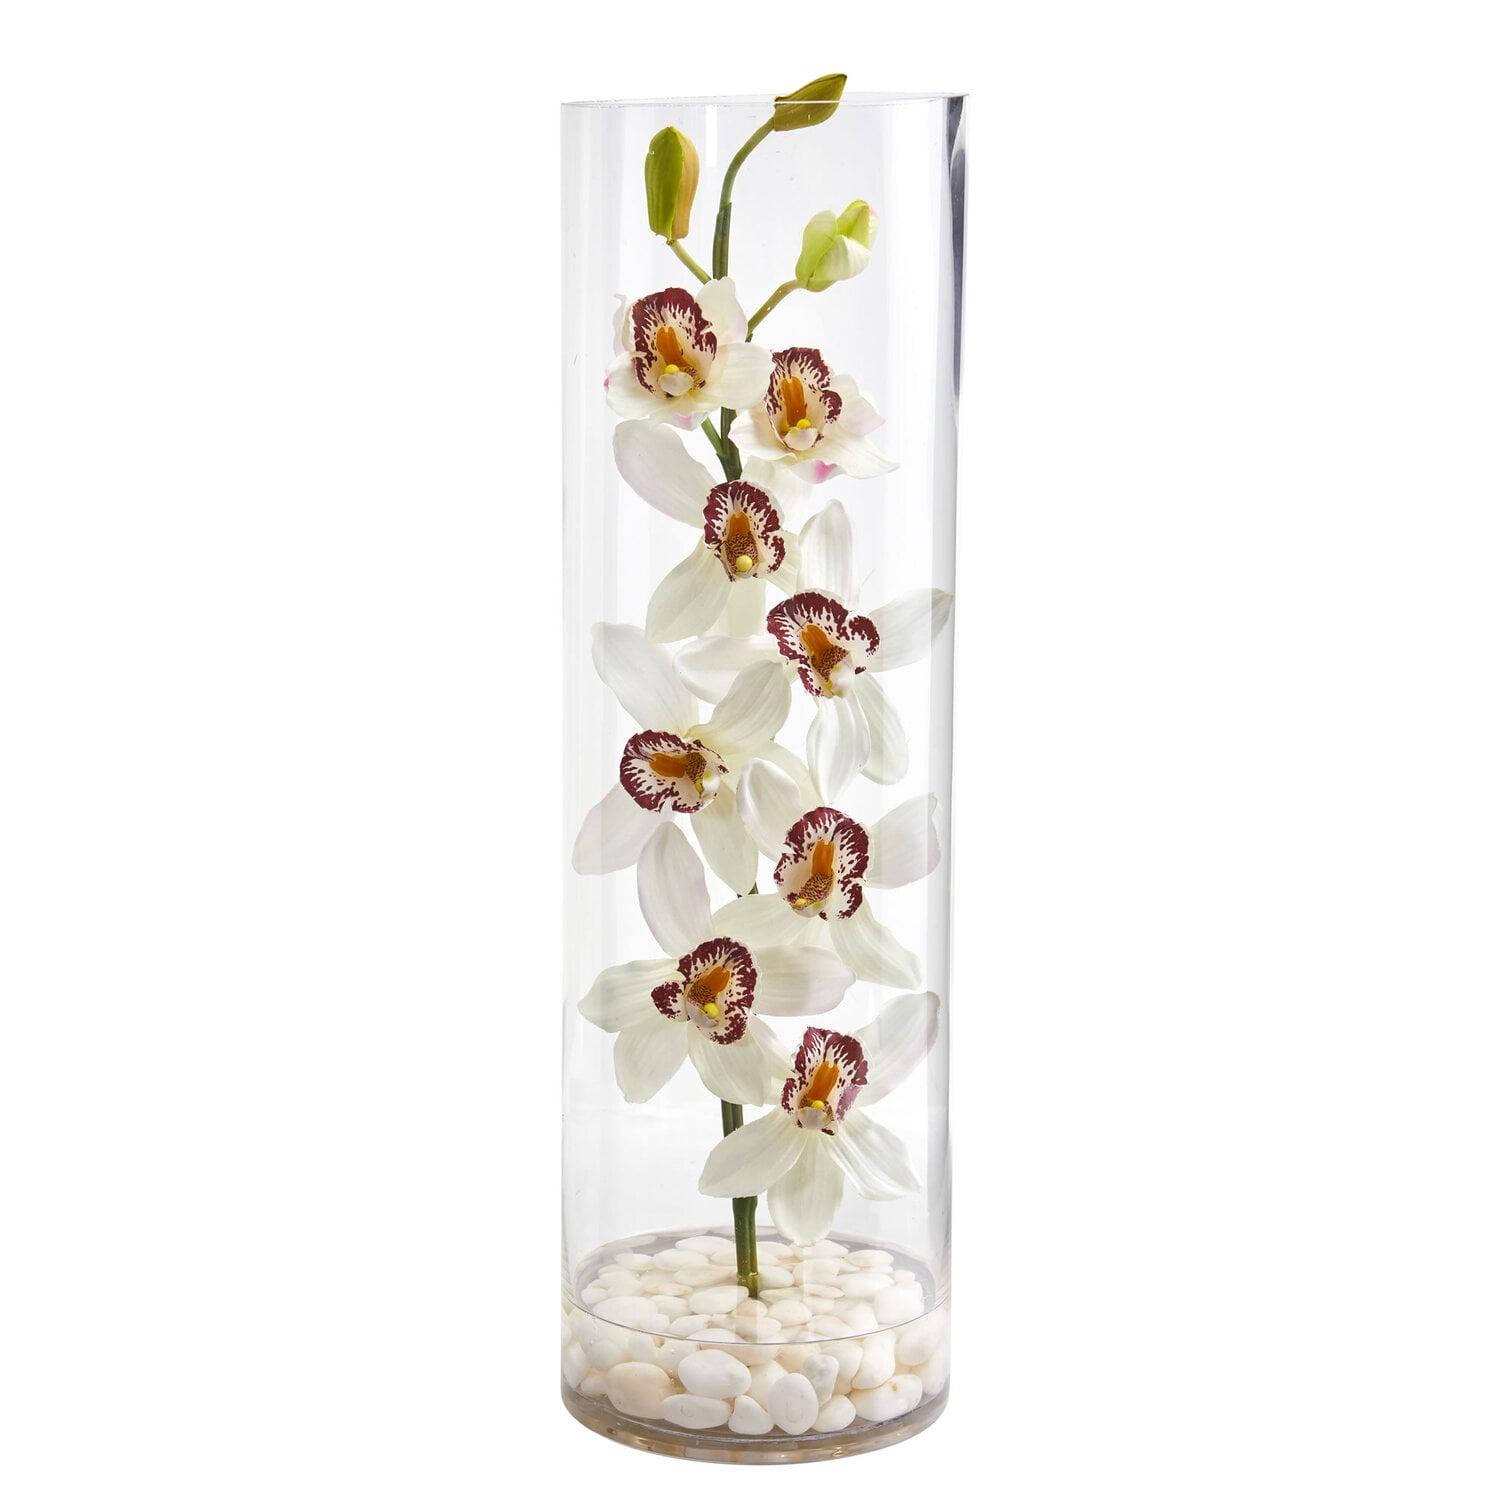 Lush Orchid Bliss 22.5" Artificial Arrangement in Cylinder Vase